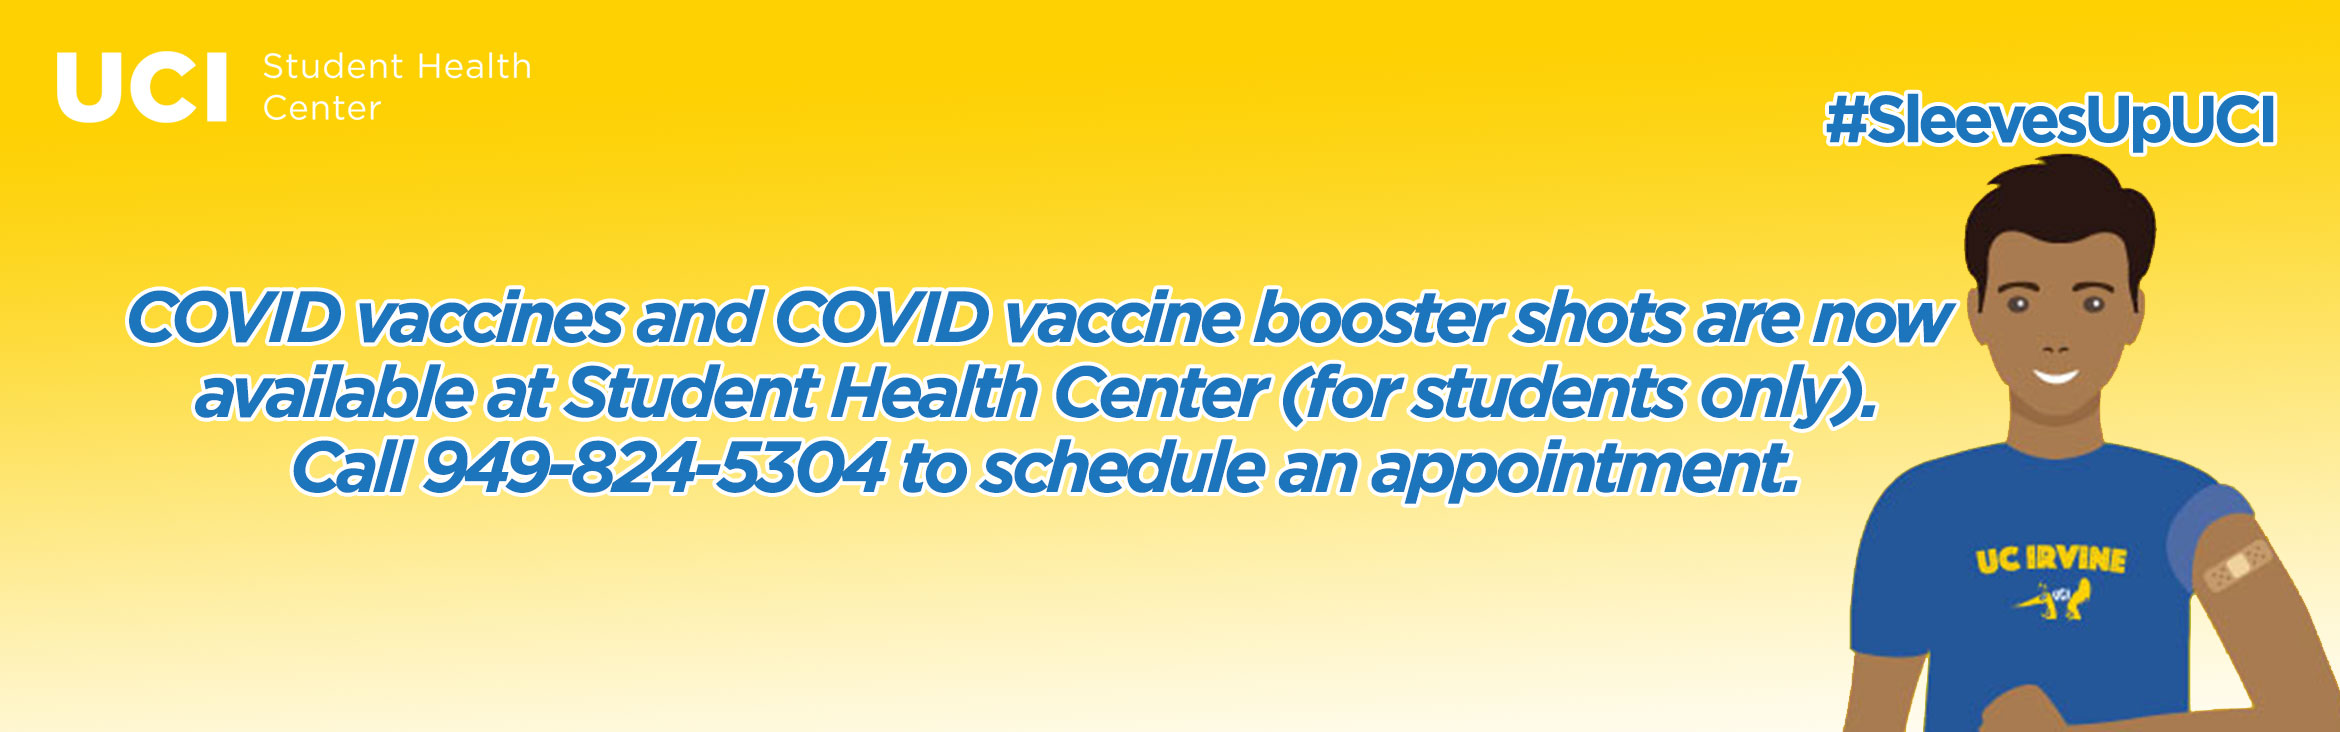 COVID vaccines are now available at Student Health Center!  Call 949-824-5304 to schedule an appointment.